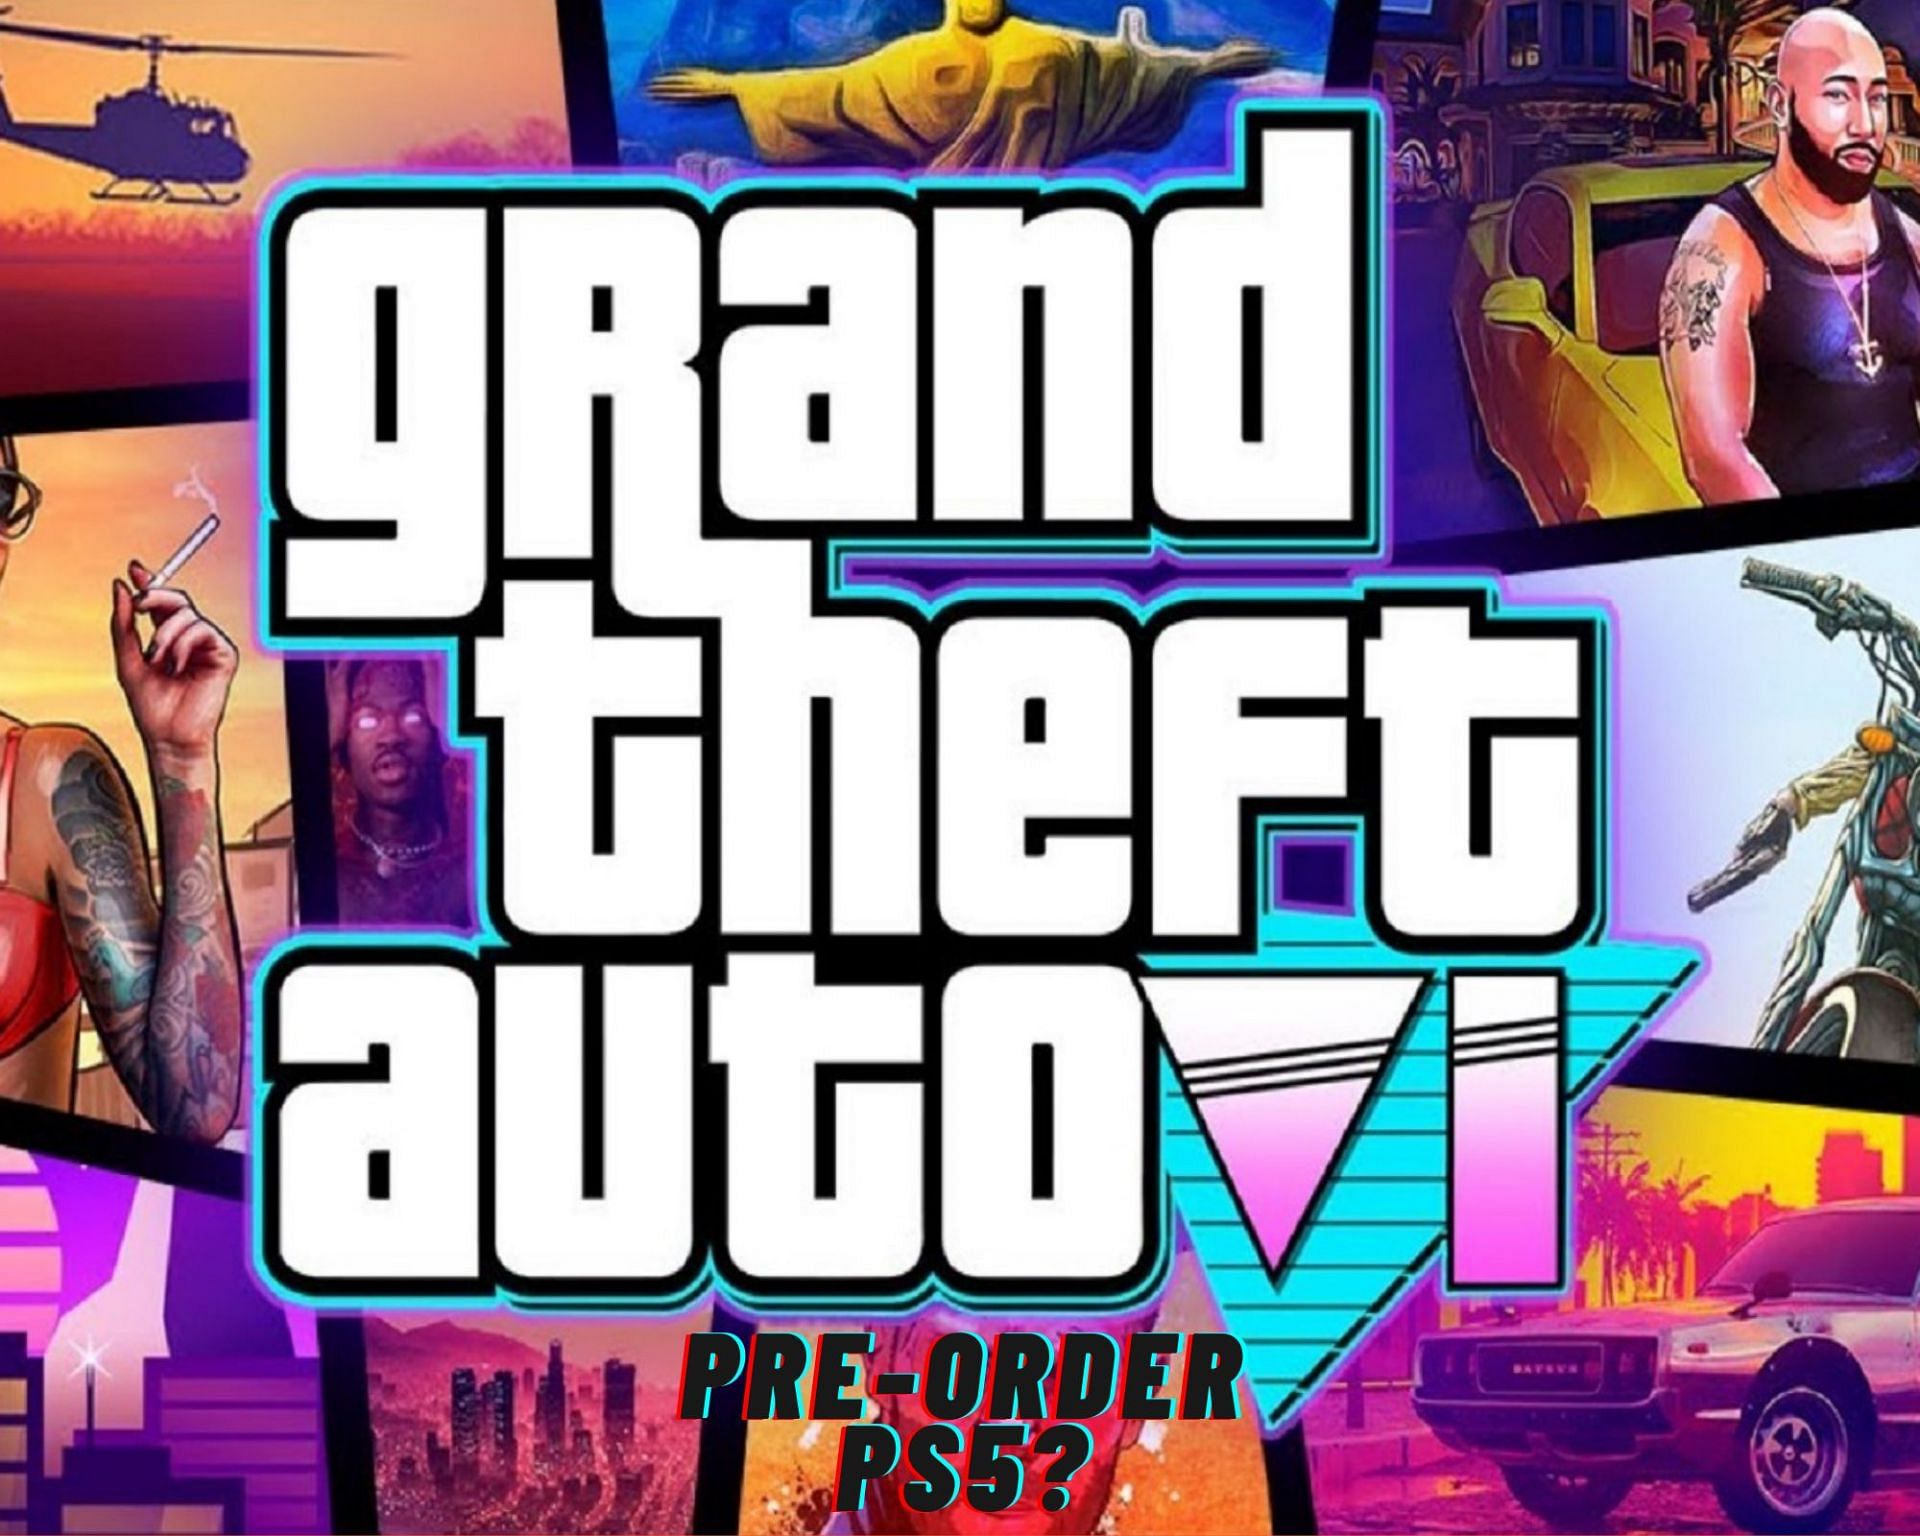 Will there be a GTA 6 Pre-Order feature for the PS5? (Image via Sportskeeda)